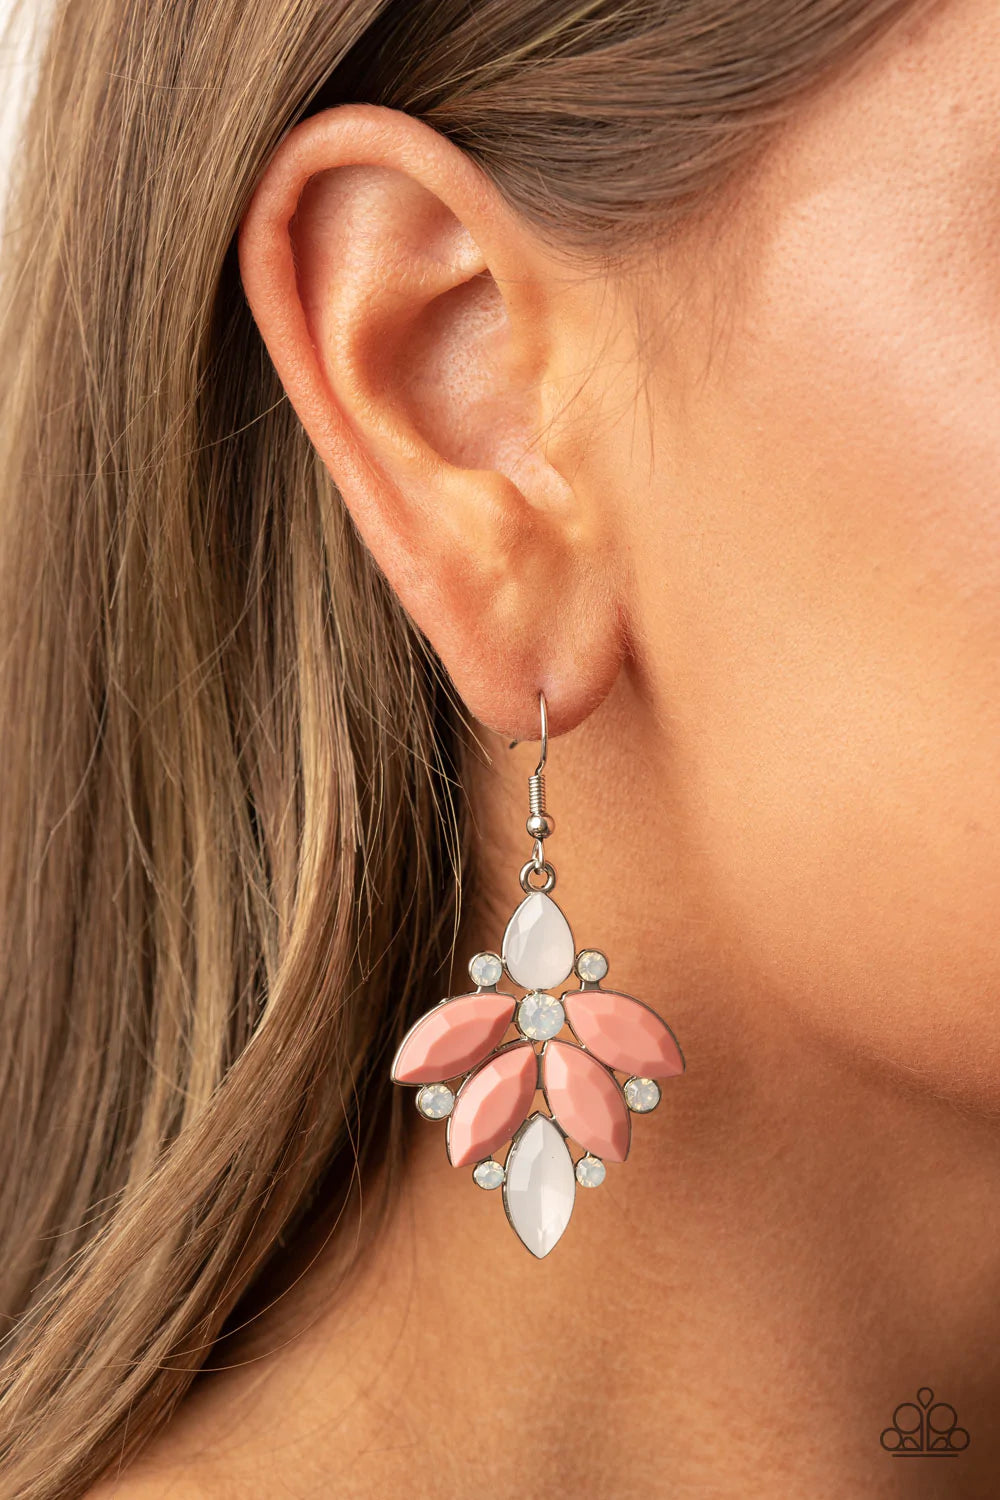 Paparazzi Accessories Fantasy Flair - Pink Infused with opal white rhinestones, glassy and acrylic Pale Rosette beads fan out into an elegantly ethereal frame. Earring attaches to a standard fishhook fitting. Sold as one pair of earrings. Jewelry